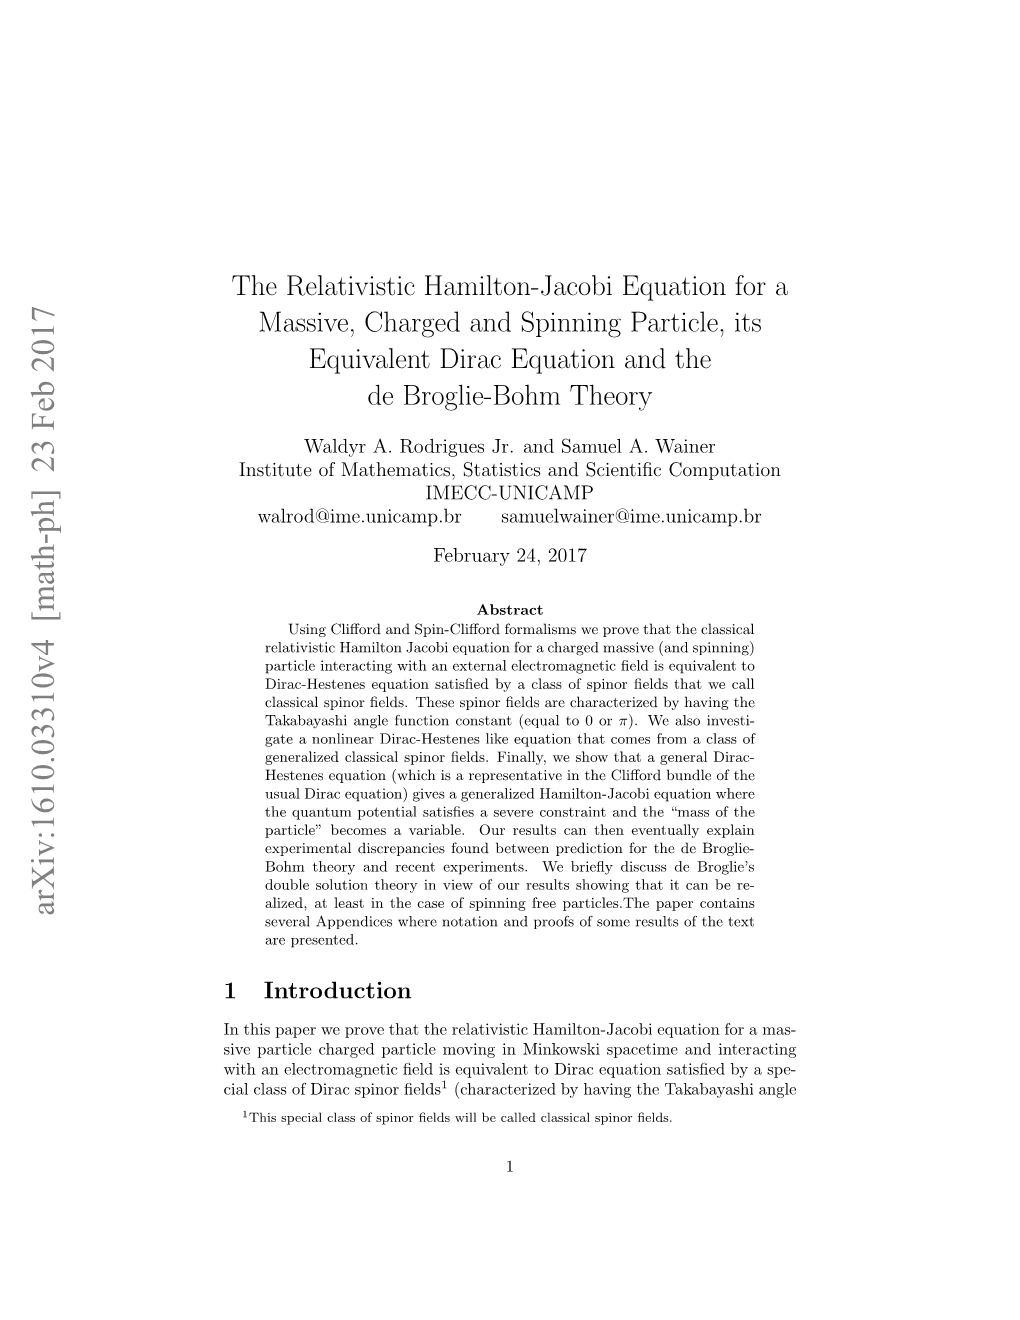 The Relativistic Hamilton-Jacobi Equation for a Massive, Charged and Spinning Particle, Its Equivalent Dirac Equation and the De Broglie-Bohm Theory